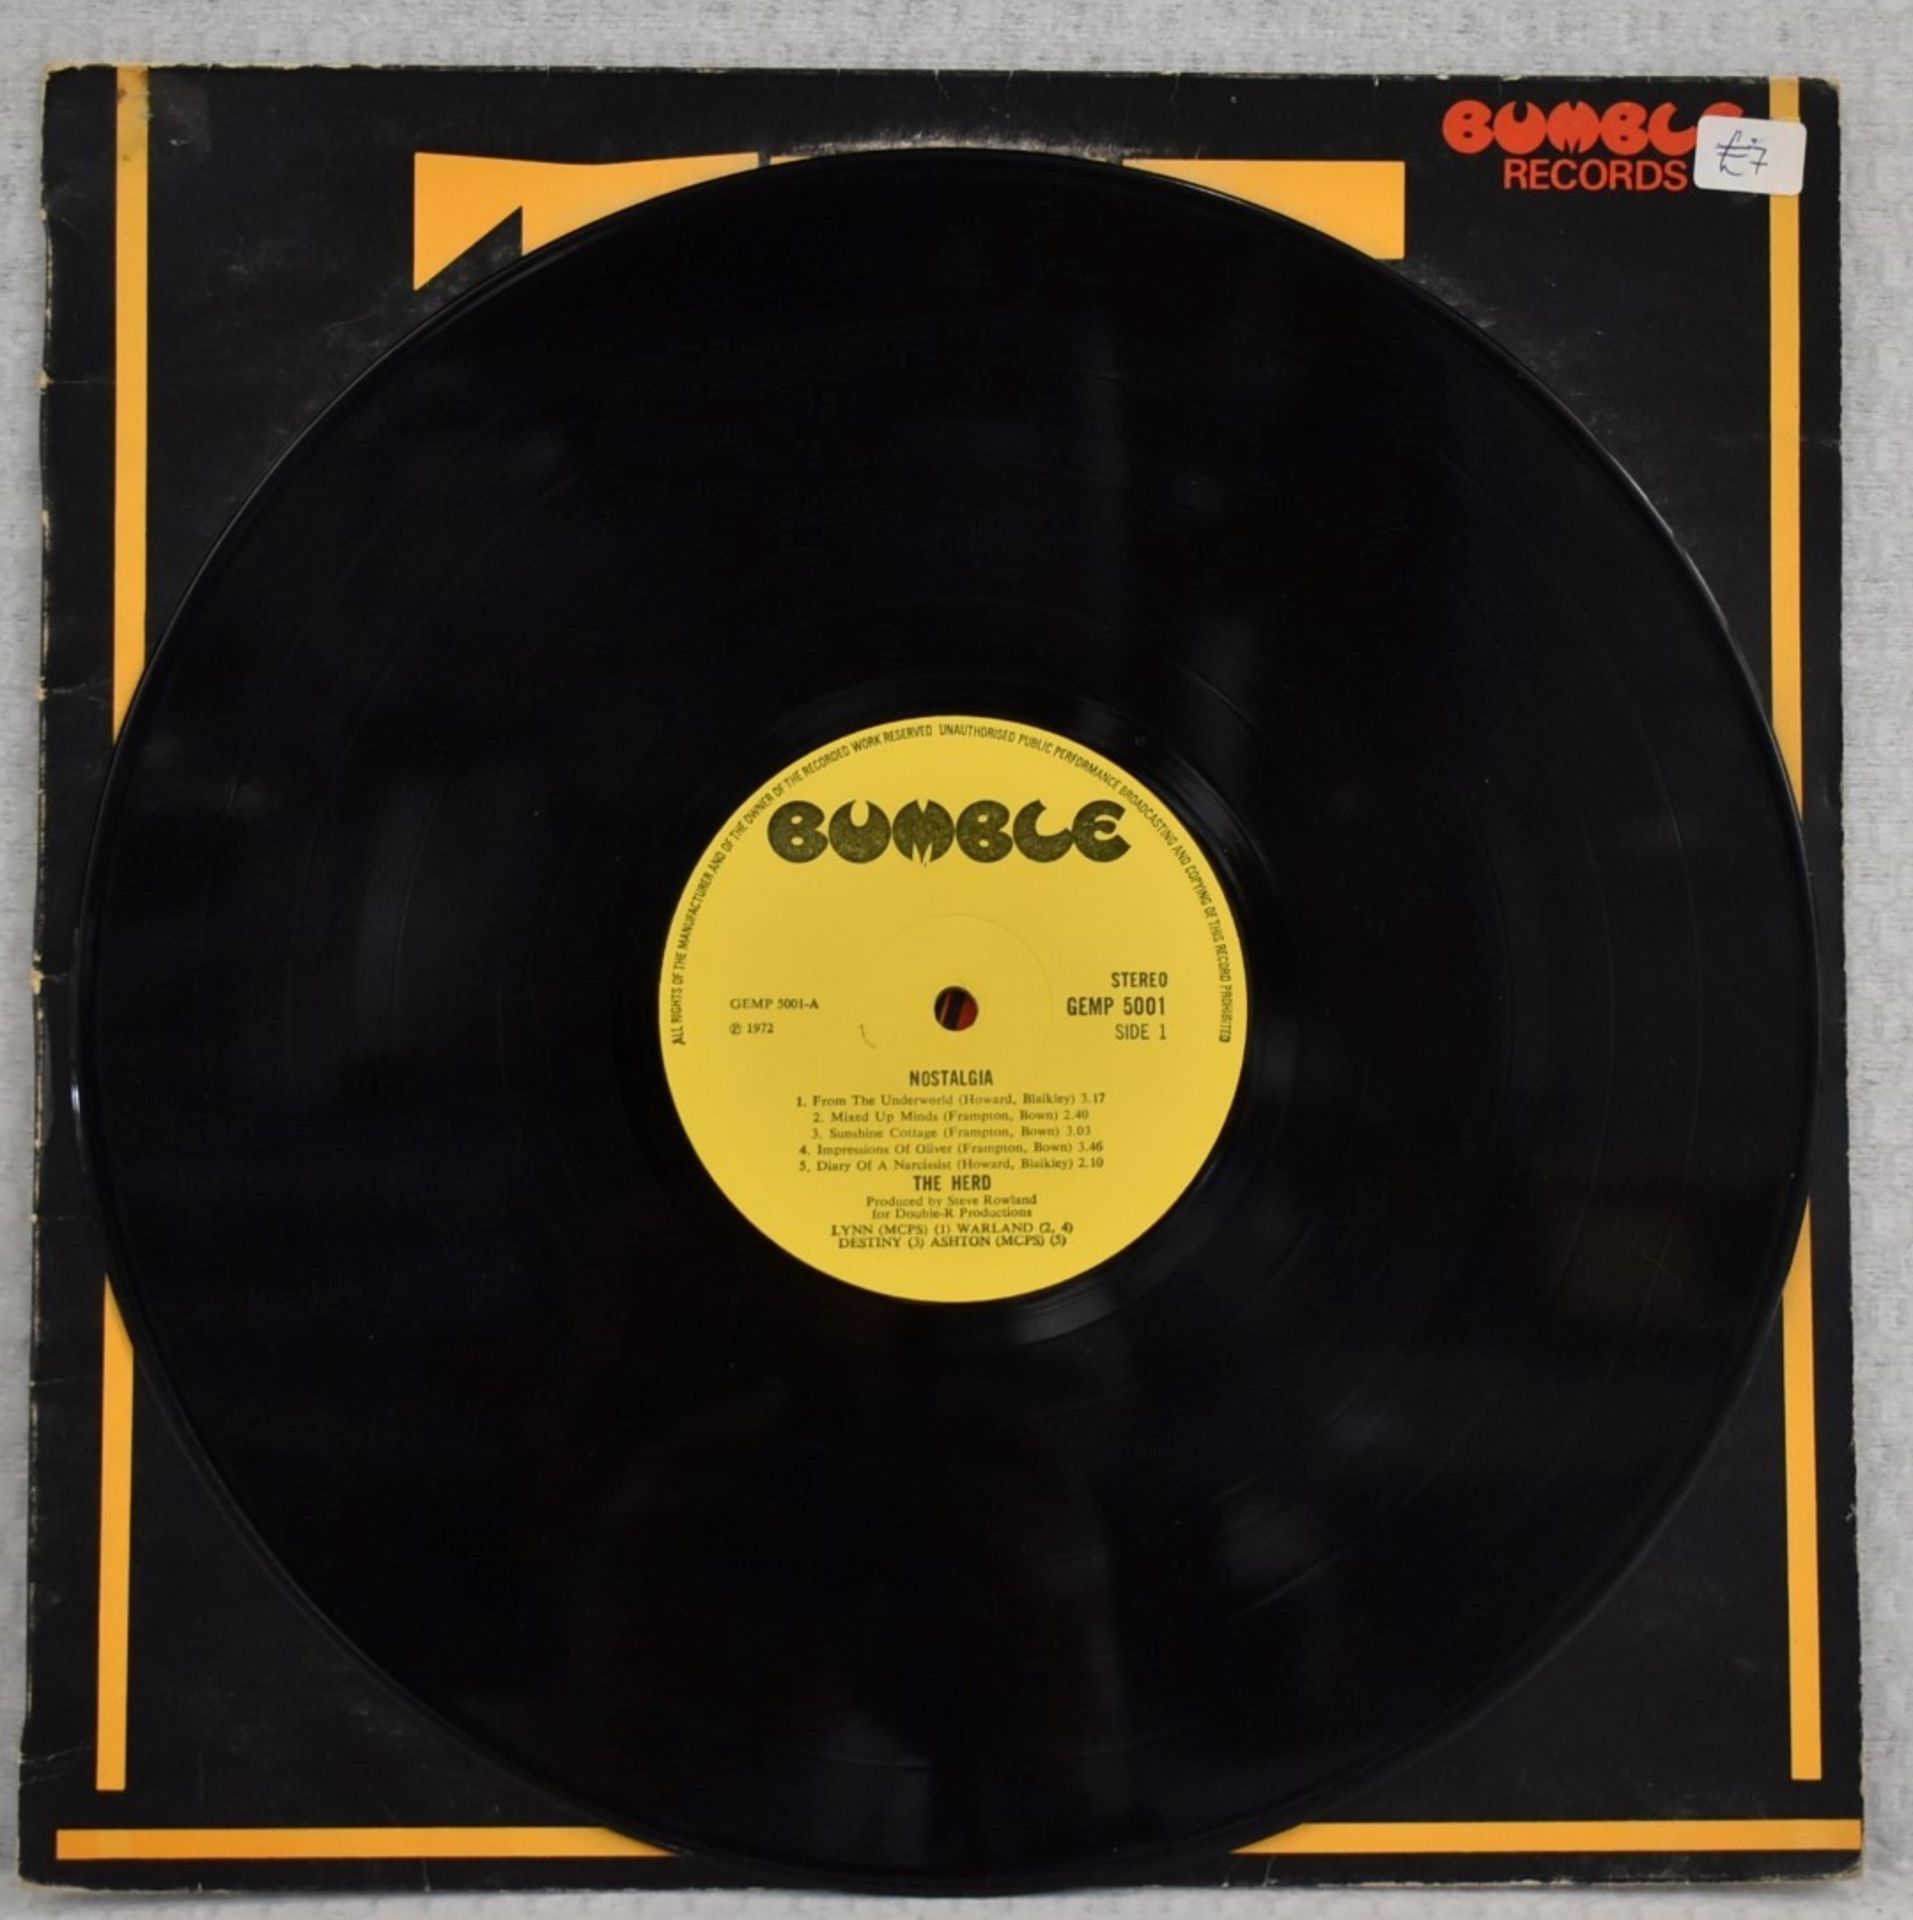 1 x THE HERD Nostalgia Bumble Records 1972 2 Sided 12 Inch Vinyl - Ref: RNR8609 - CL720 - Location: - Image 12 of 16